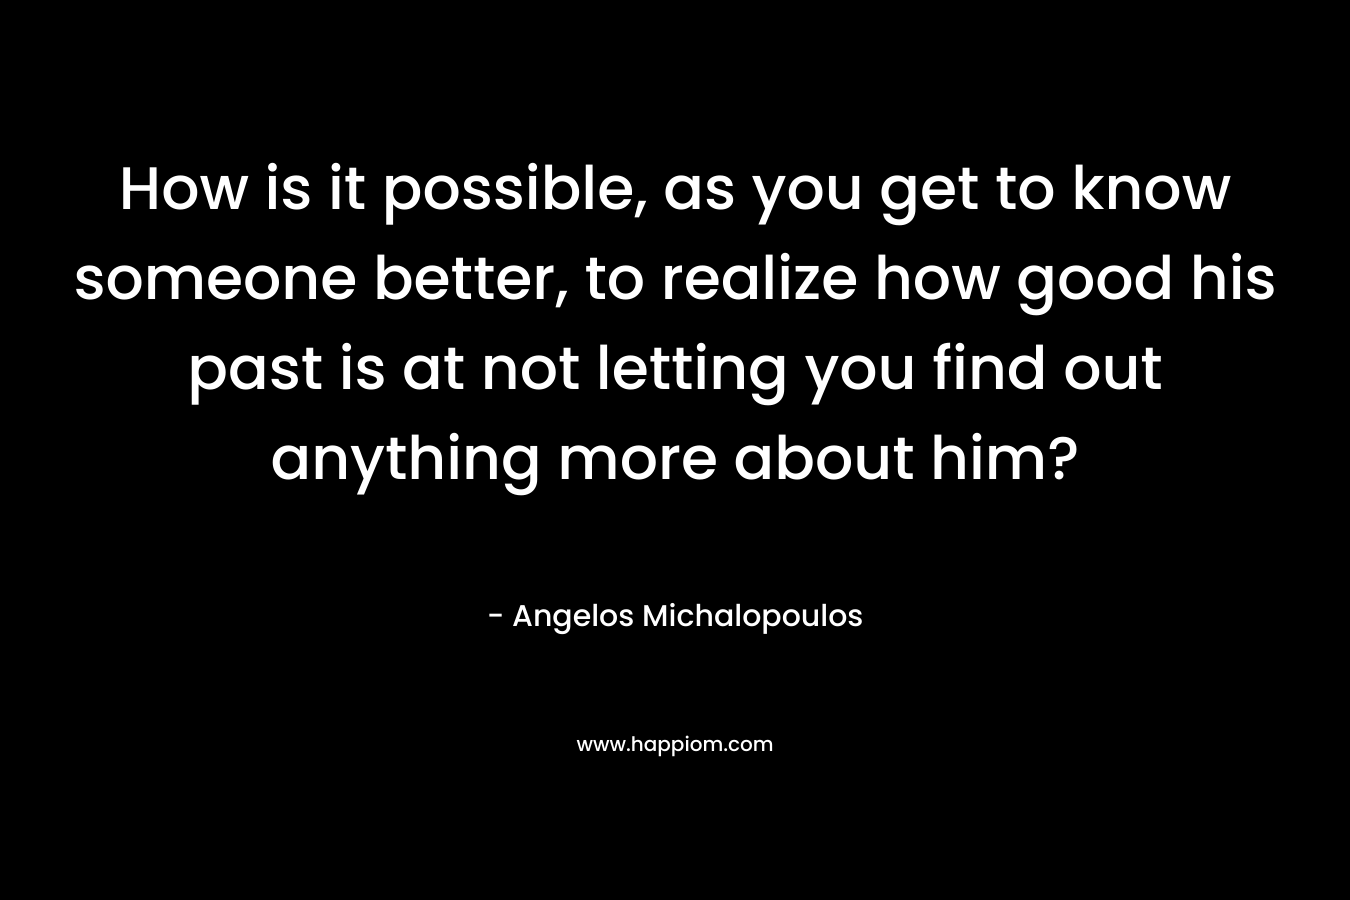 How is it possible, as you get to know someone better, to realize how good his past is at not letting you find out anything more about him?